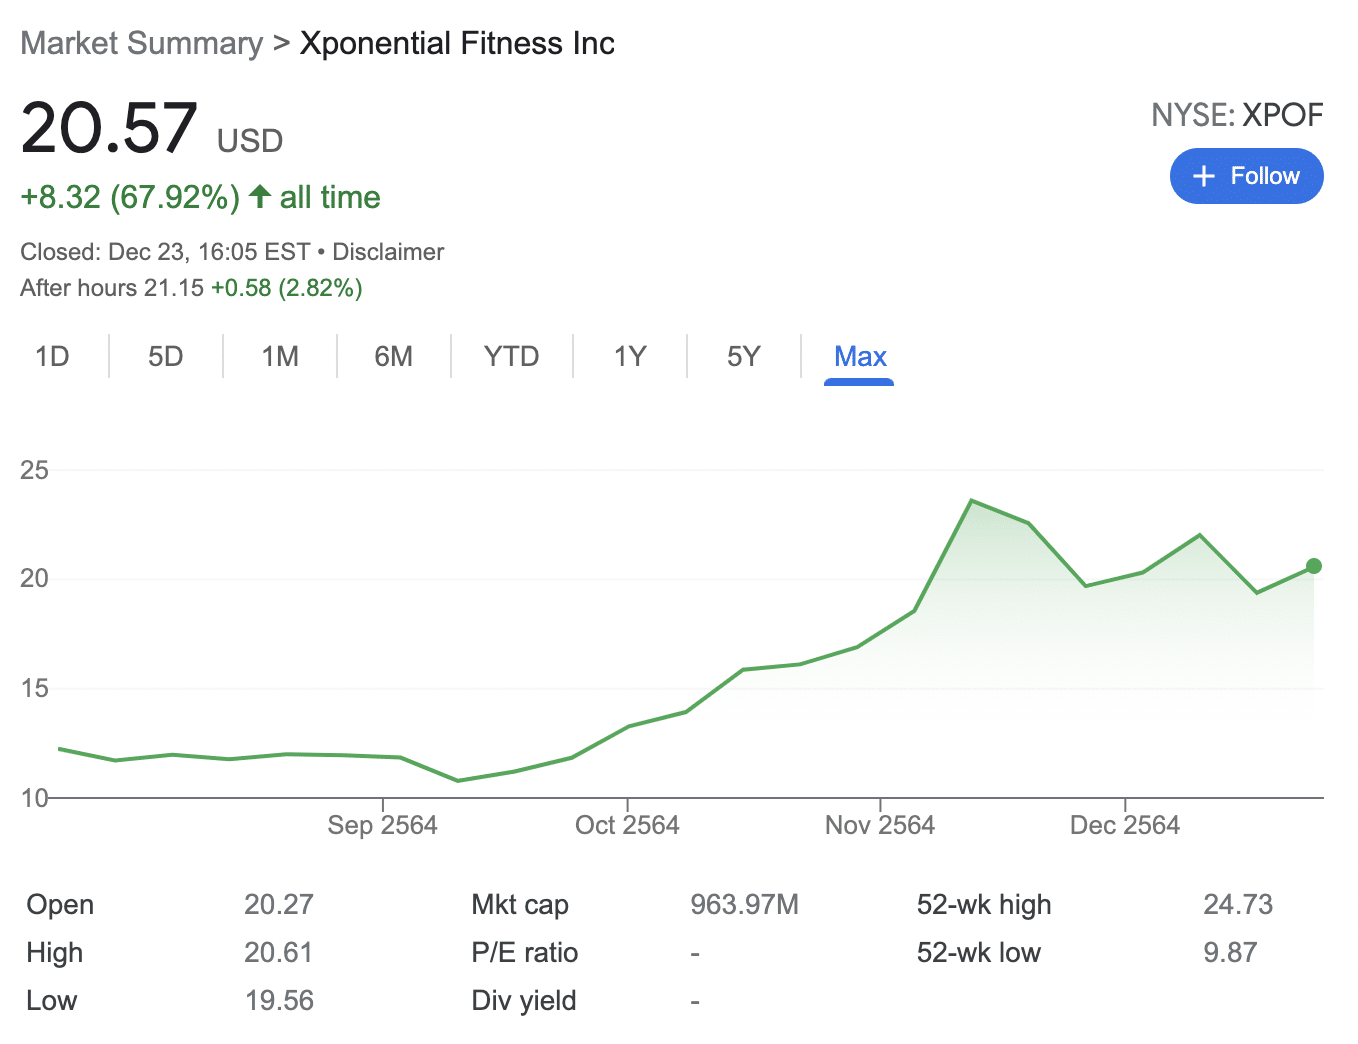 Xponential Fitness stocks